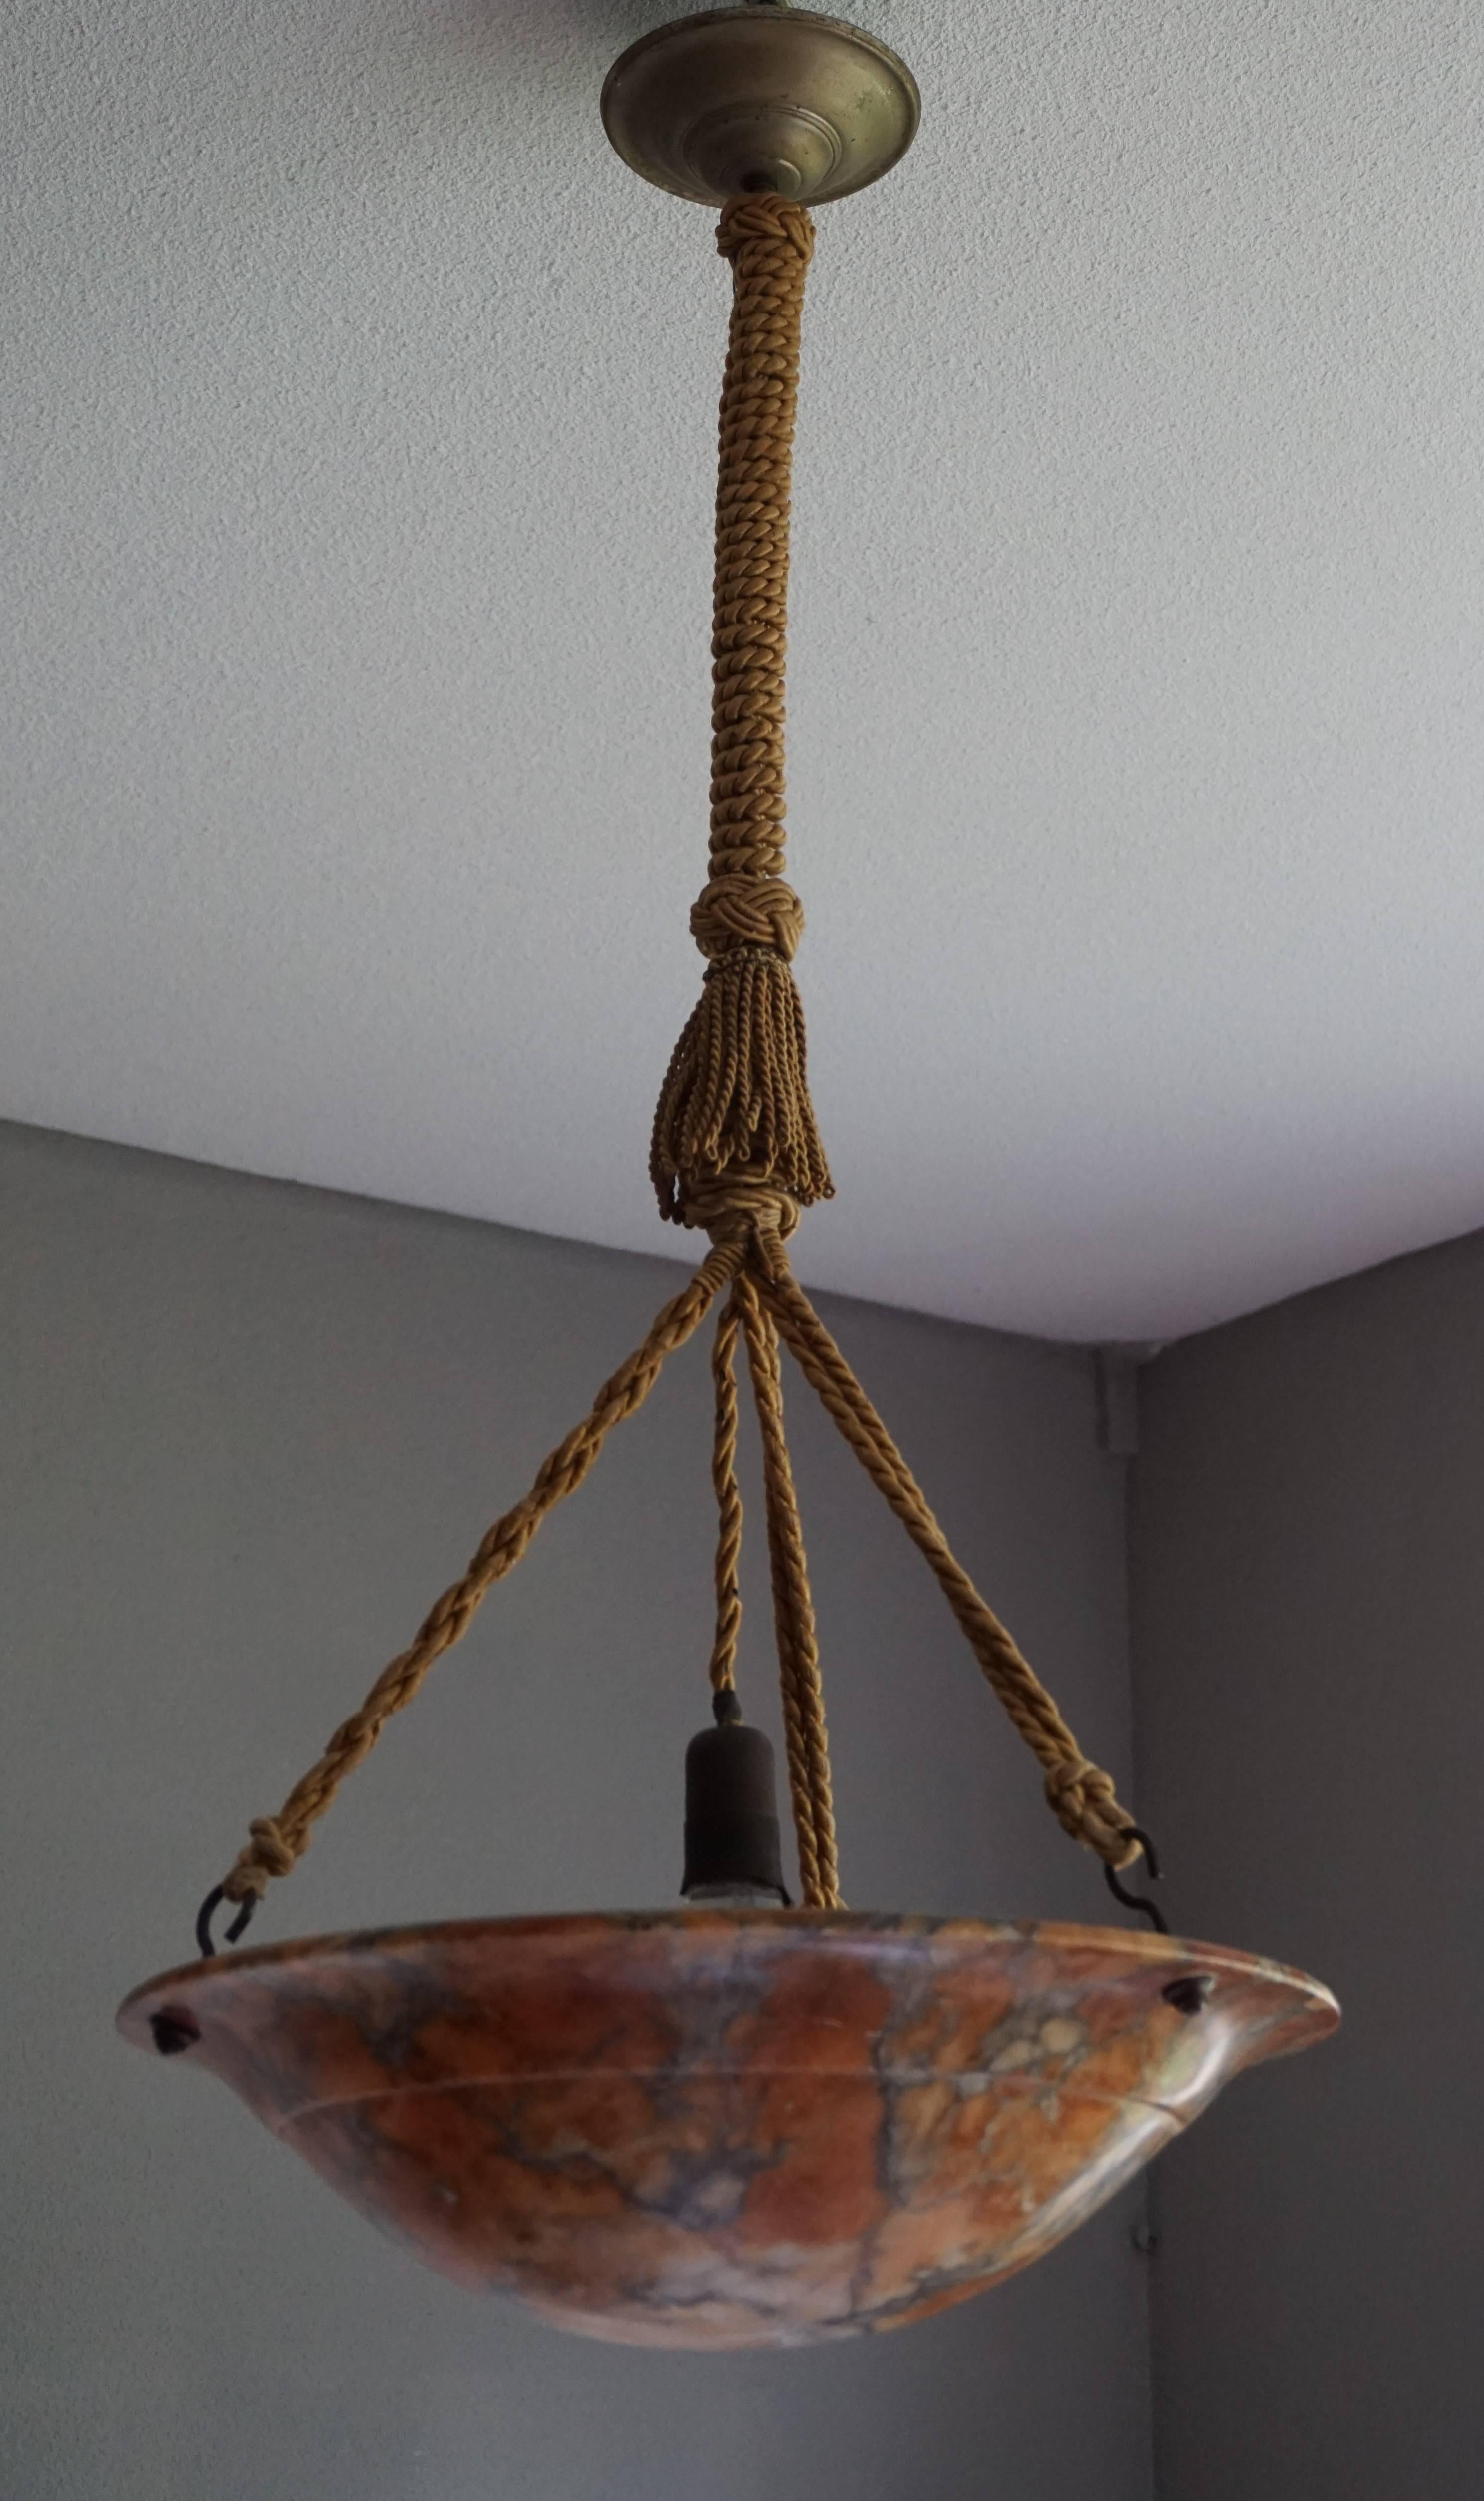 Great shape and color alabaster pendant.

If you are looking for a good quality and condition pendant then this striking example could be the one or you. This practical size alabaster shade comes with the Original rope and the combination of the two